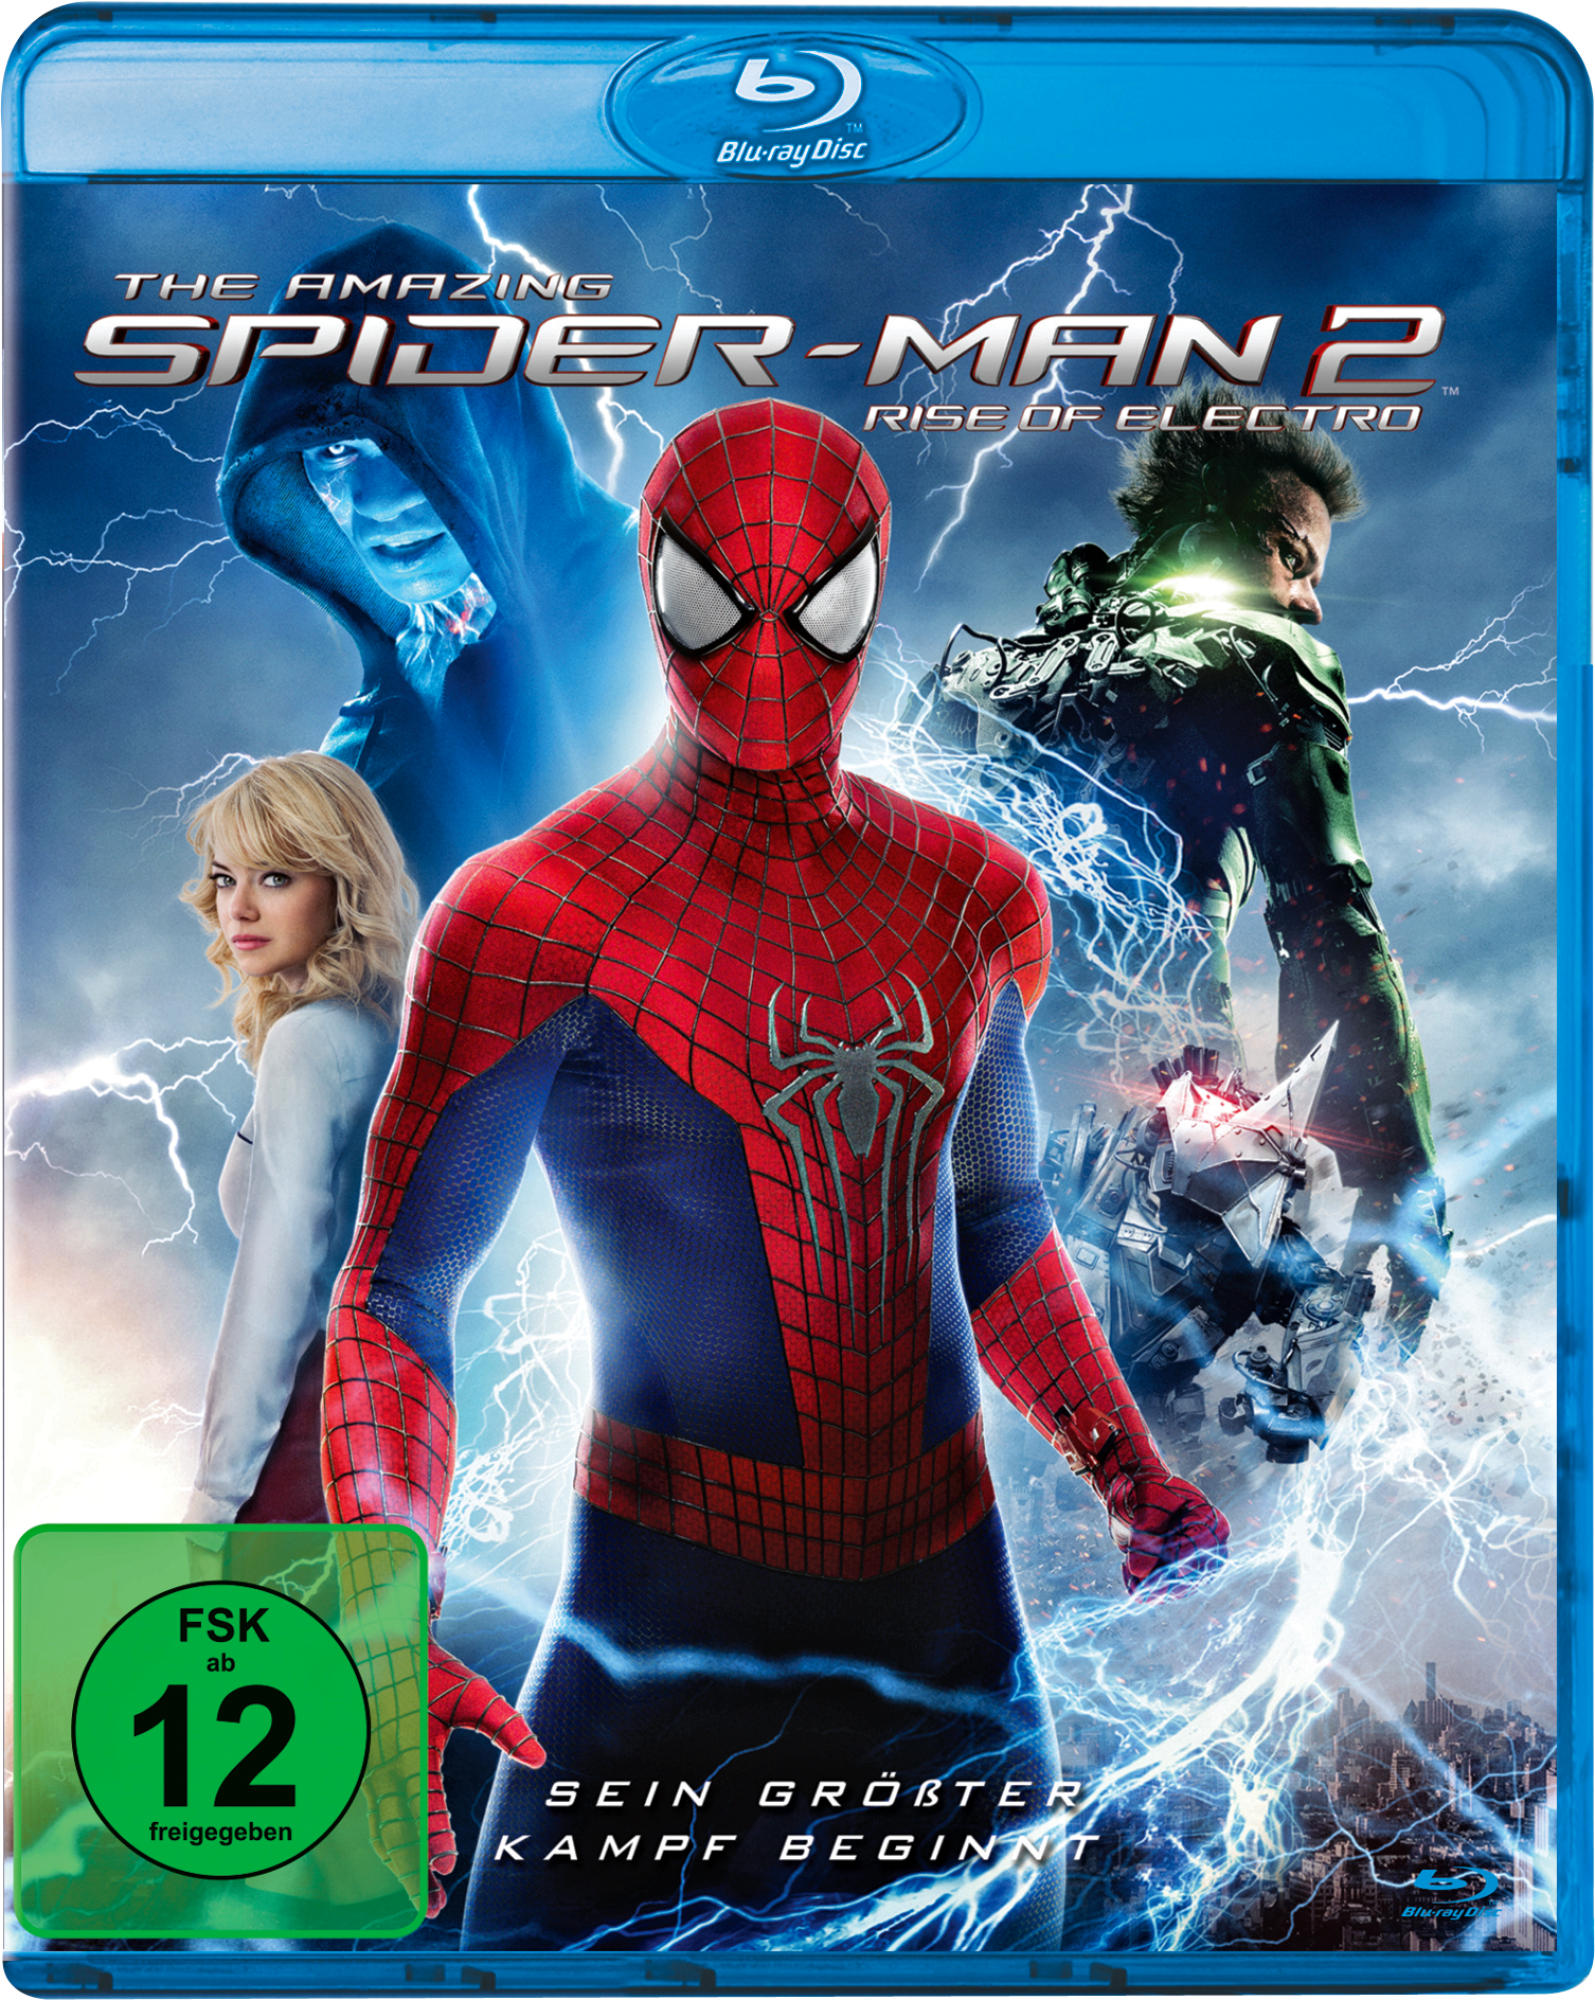 Rise of 2: Electro Amazing The Blu-ray Spider-Man